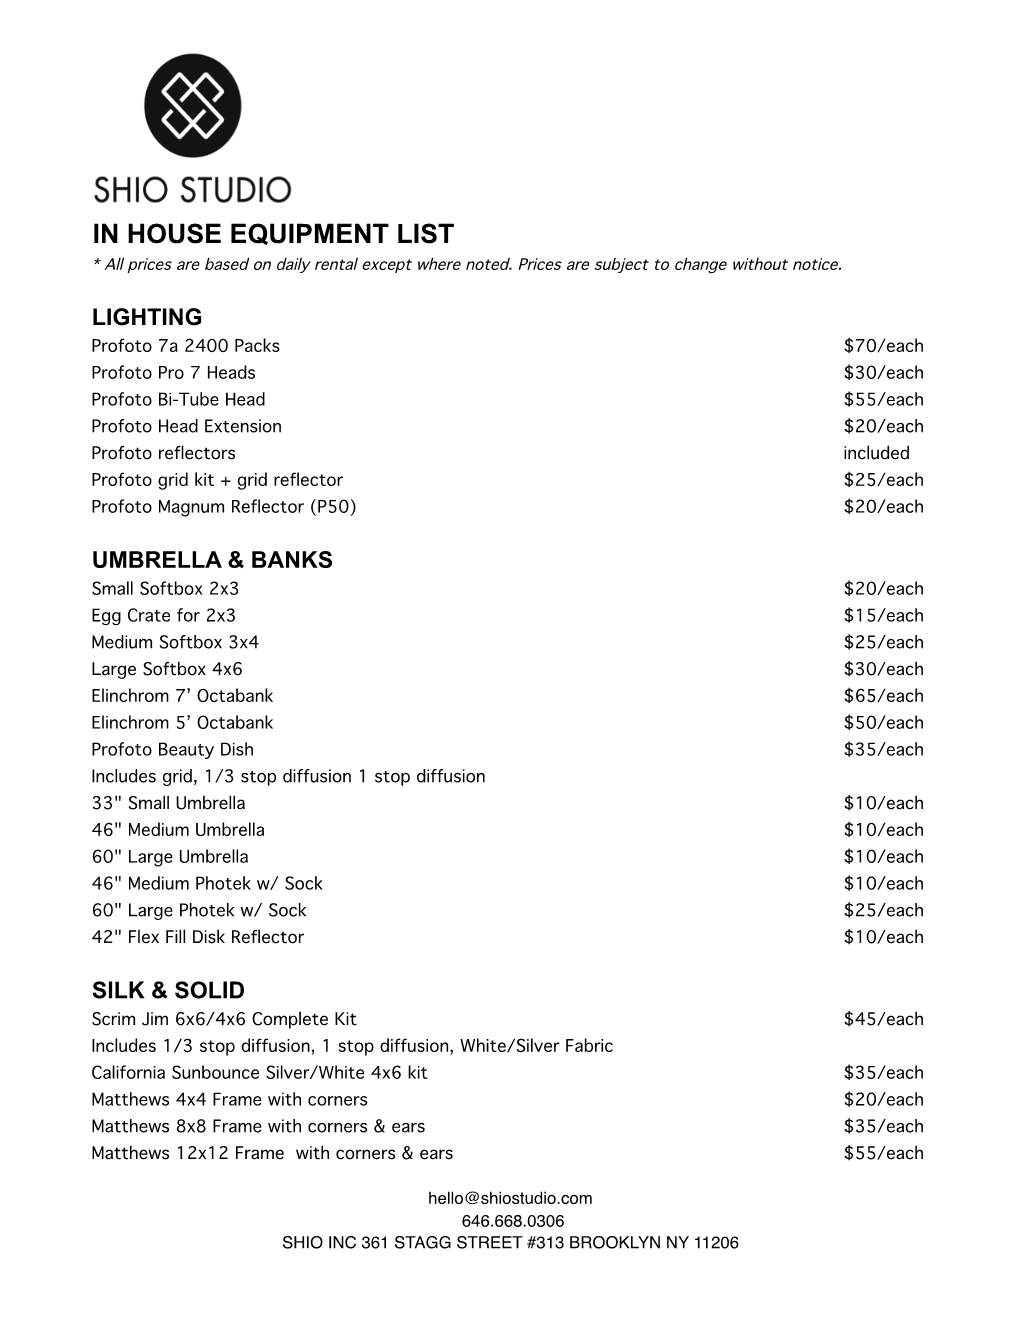 IN HOUSE EQUIPMENT LIST * All Prices Are Based on Daily Rental Except Where Noted